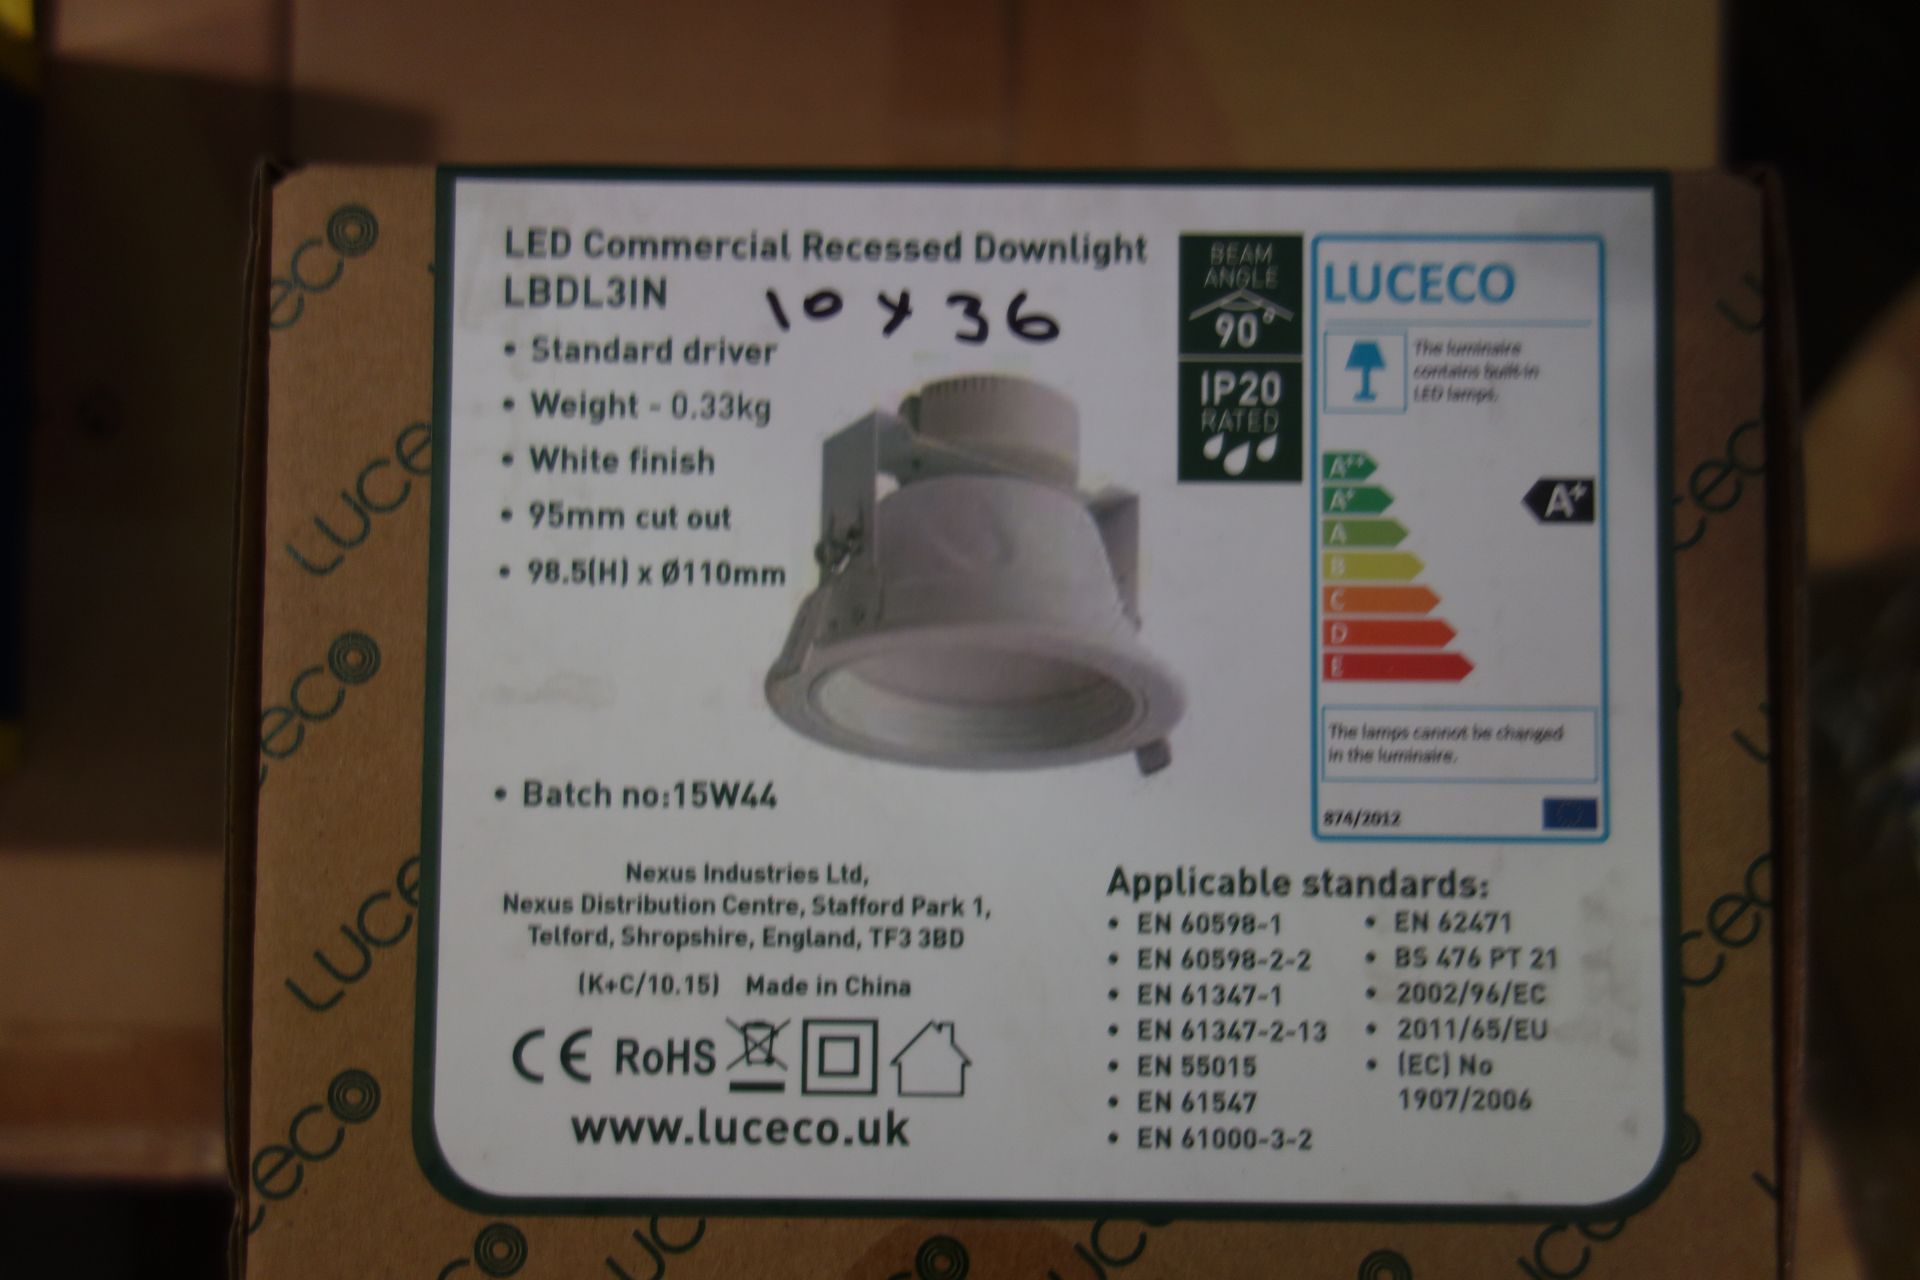 36 X Luceco LBDL3IN LED Commericial Recessed Downlights White Finish